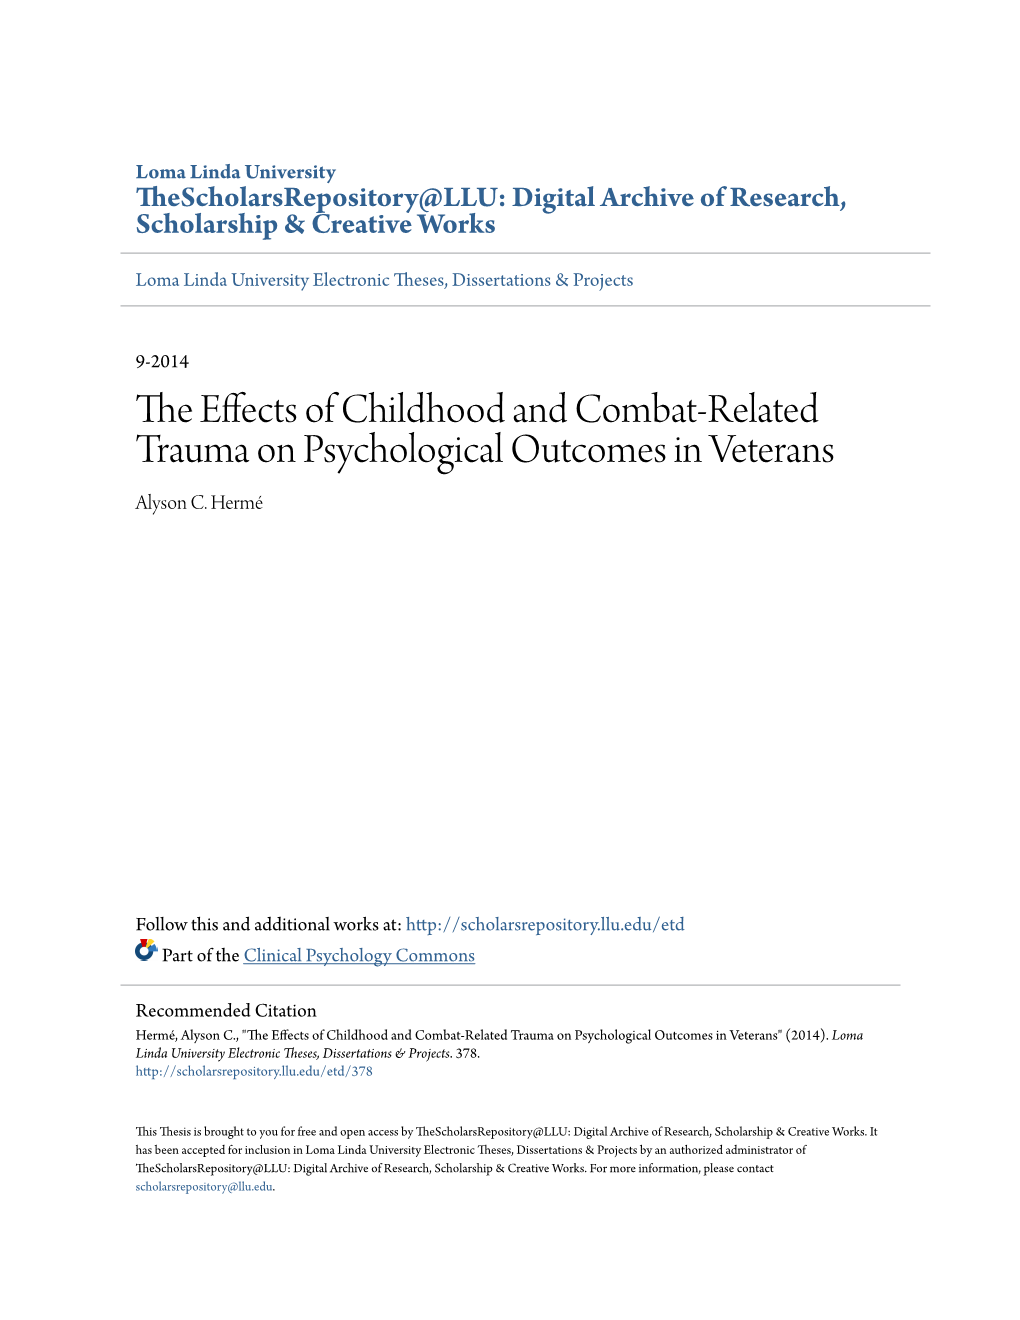 The Effects of Childhood and Combat-Related Trauma on Psychological Outcomes in Veterans" (2014)